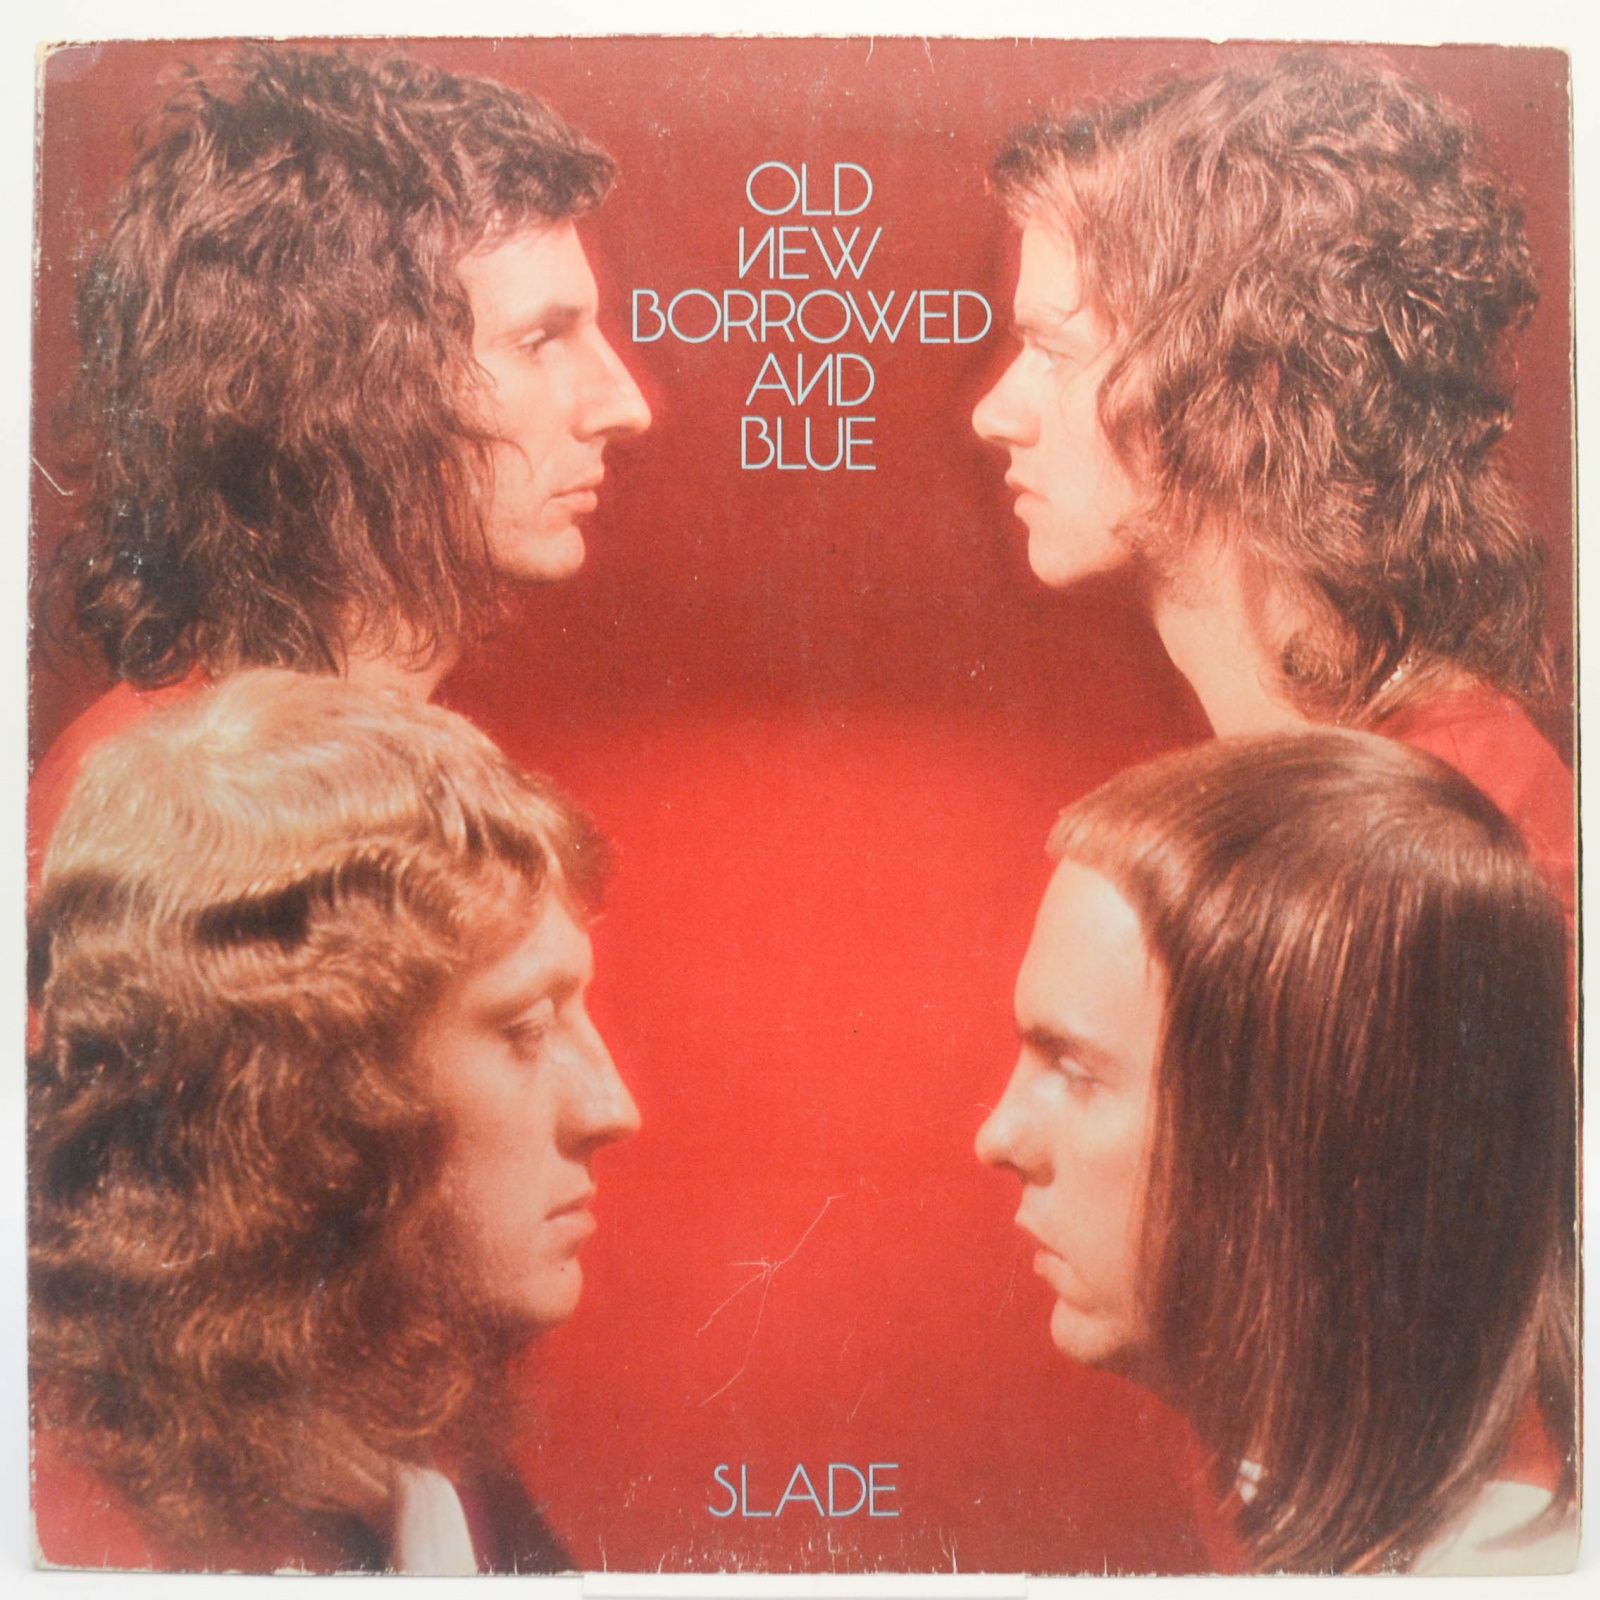 Old New Borrowed And Blue (UK), 1974